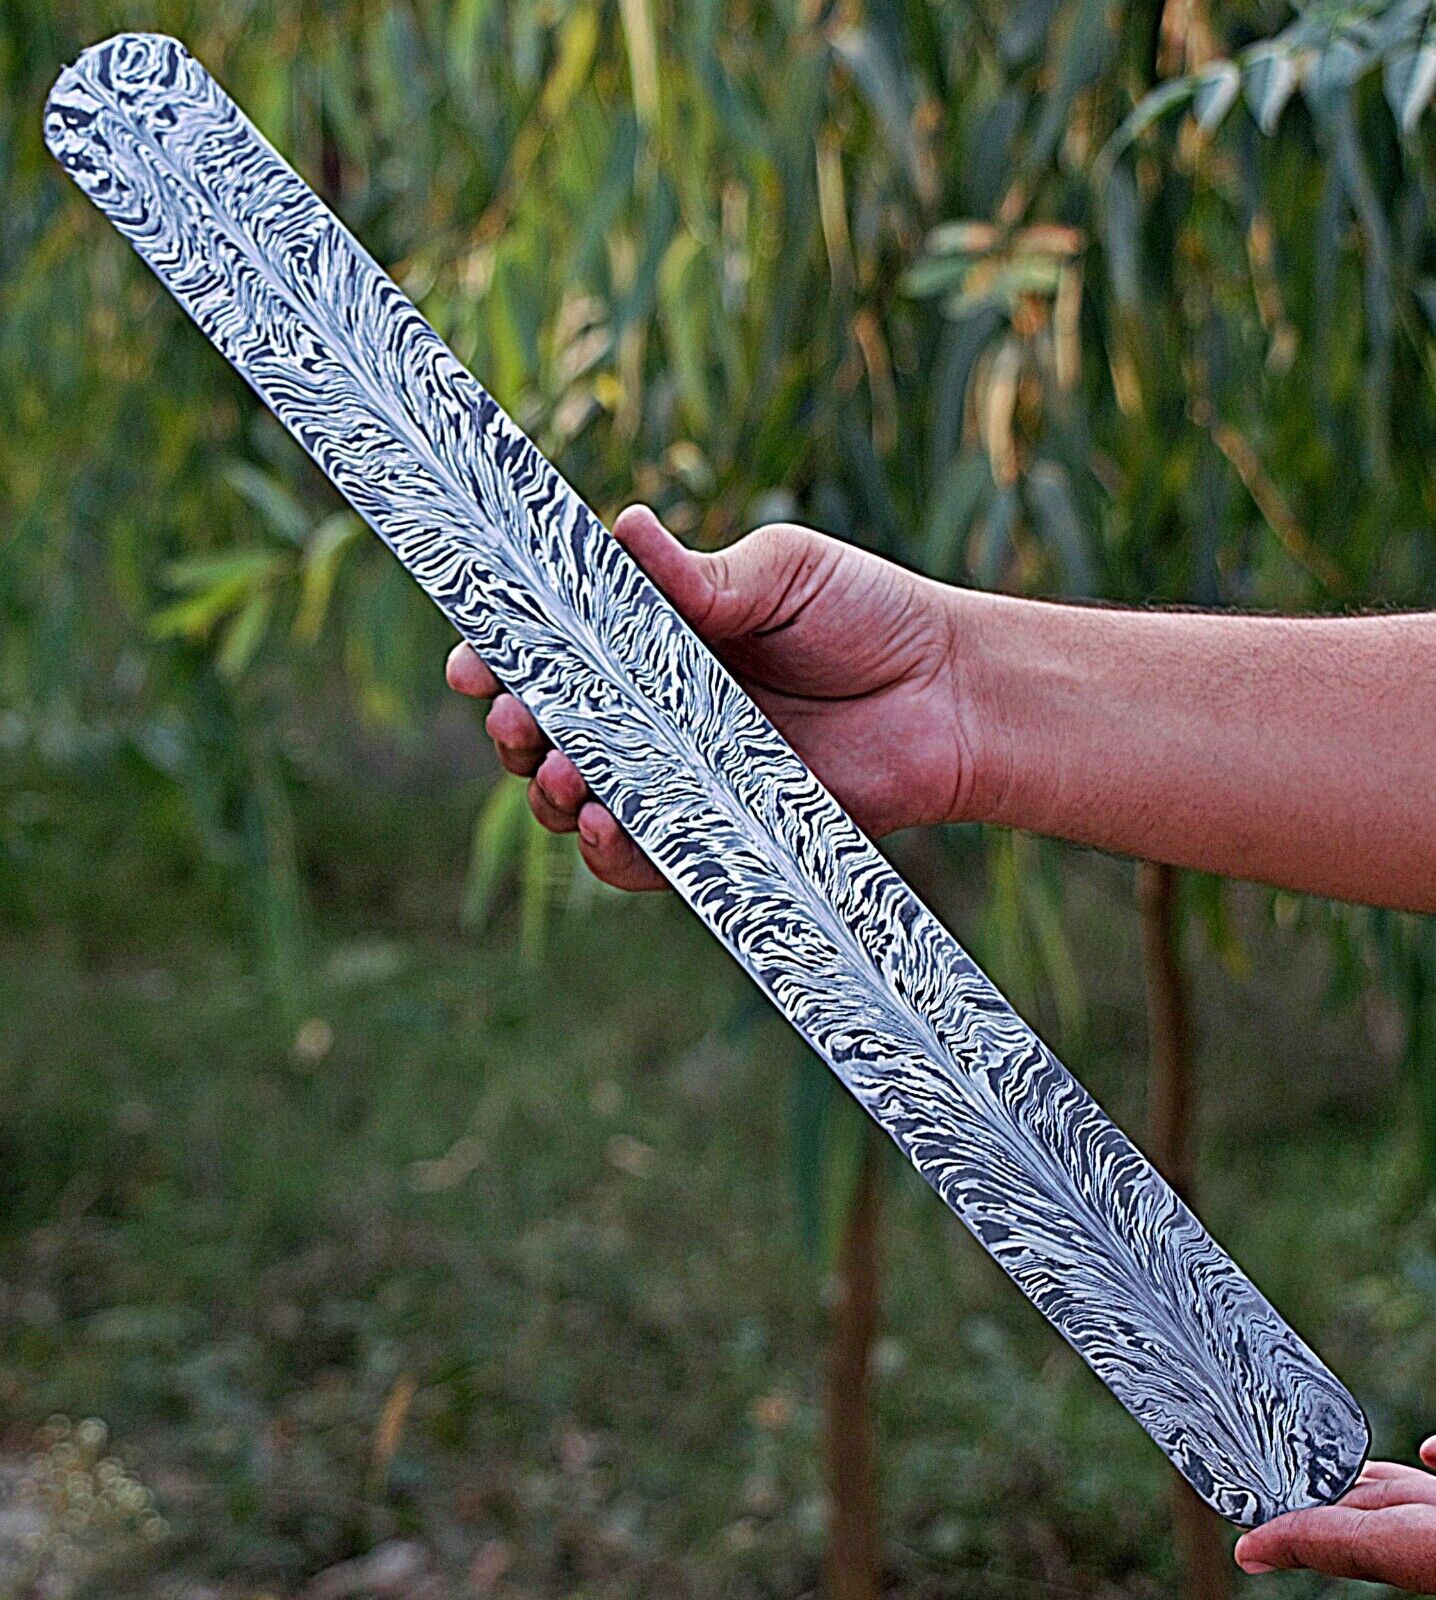 20 INCH FORGED FEATHER DAMASCUS STEEL BLANK BILLET BAR FOR KNIFE MAKING